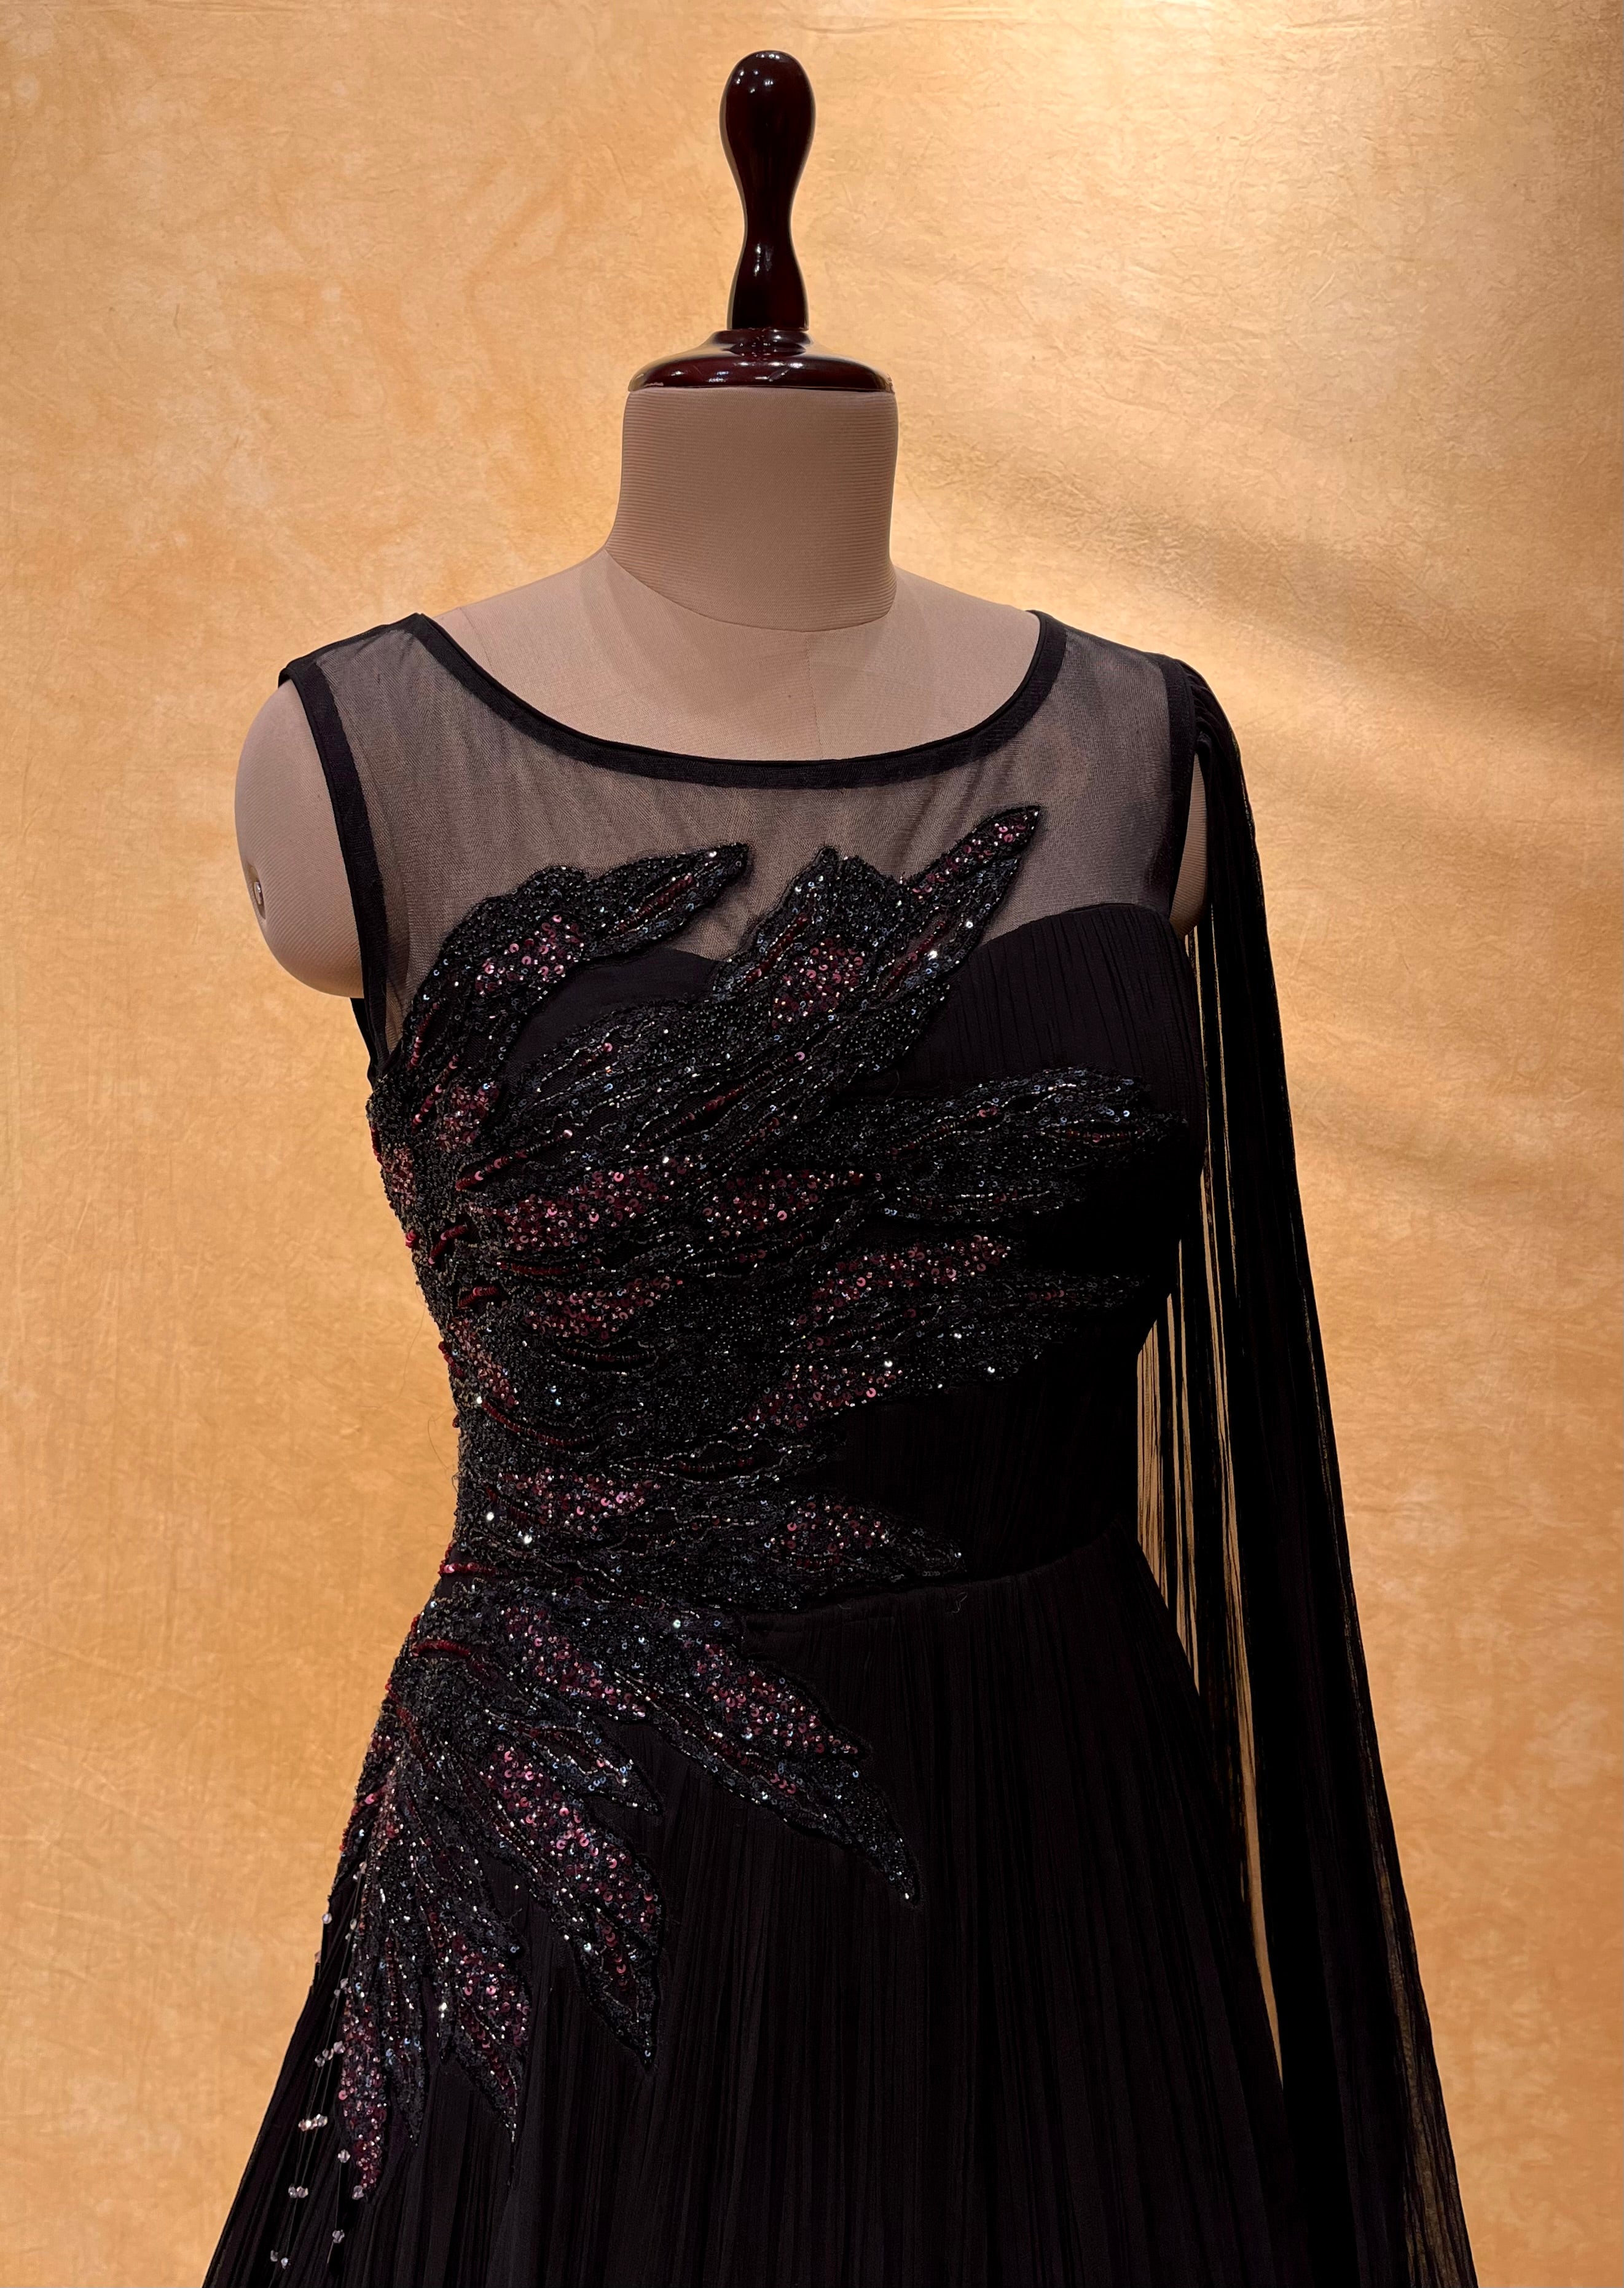 Shop the Latest Black Color Gown Online at Best Price